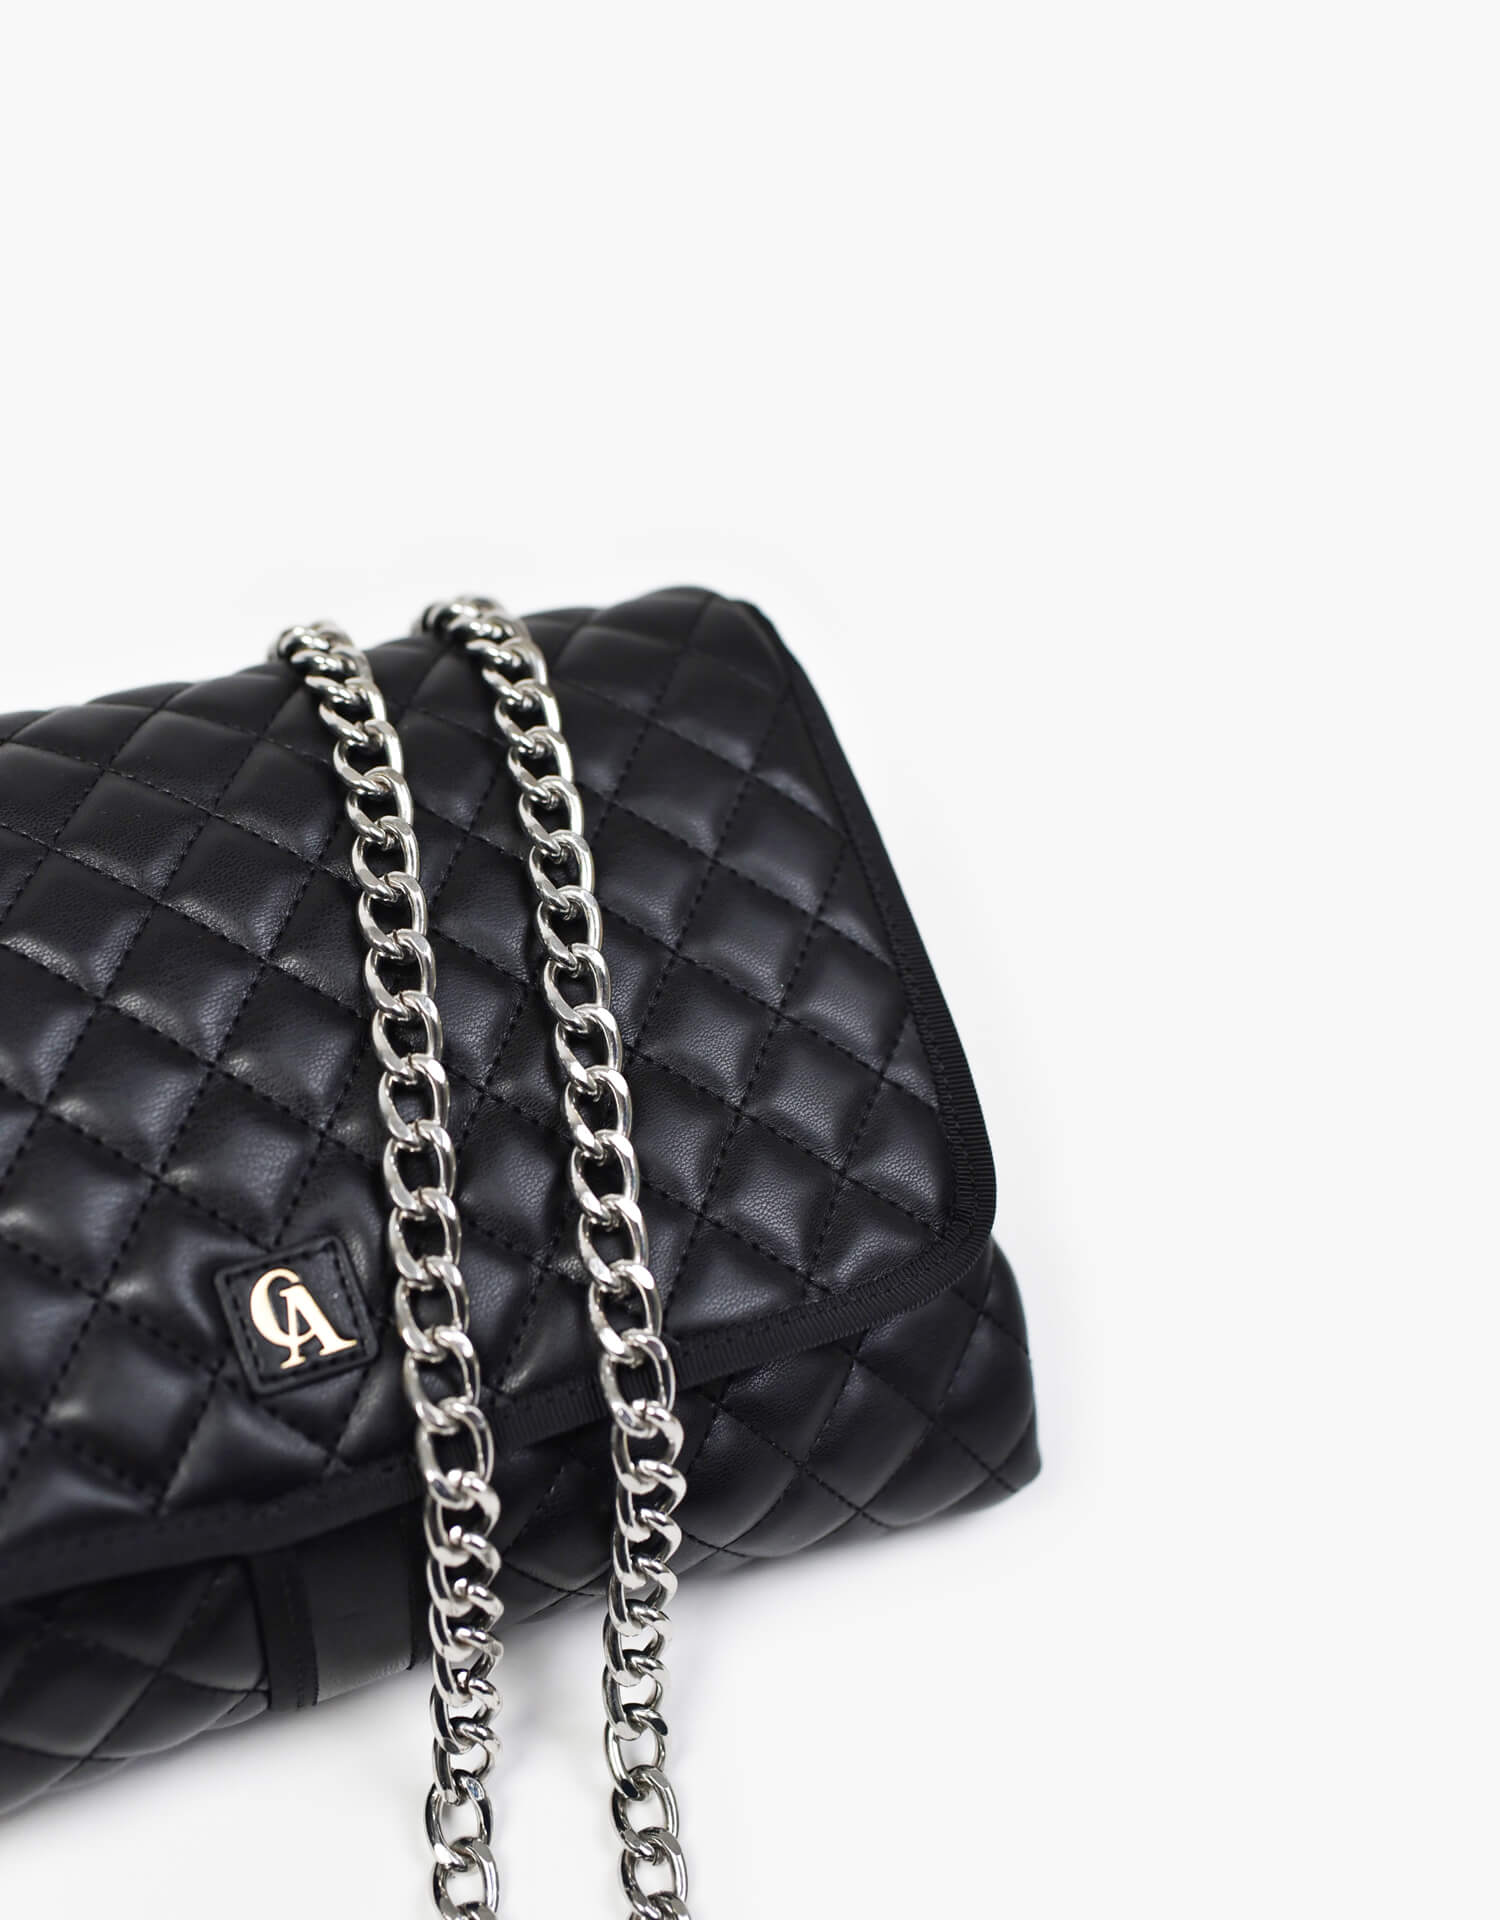 Chanel Large Quilted Chevron Flap: Bag Review - Happy High Life